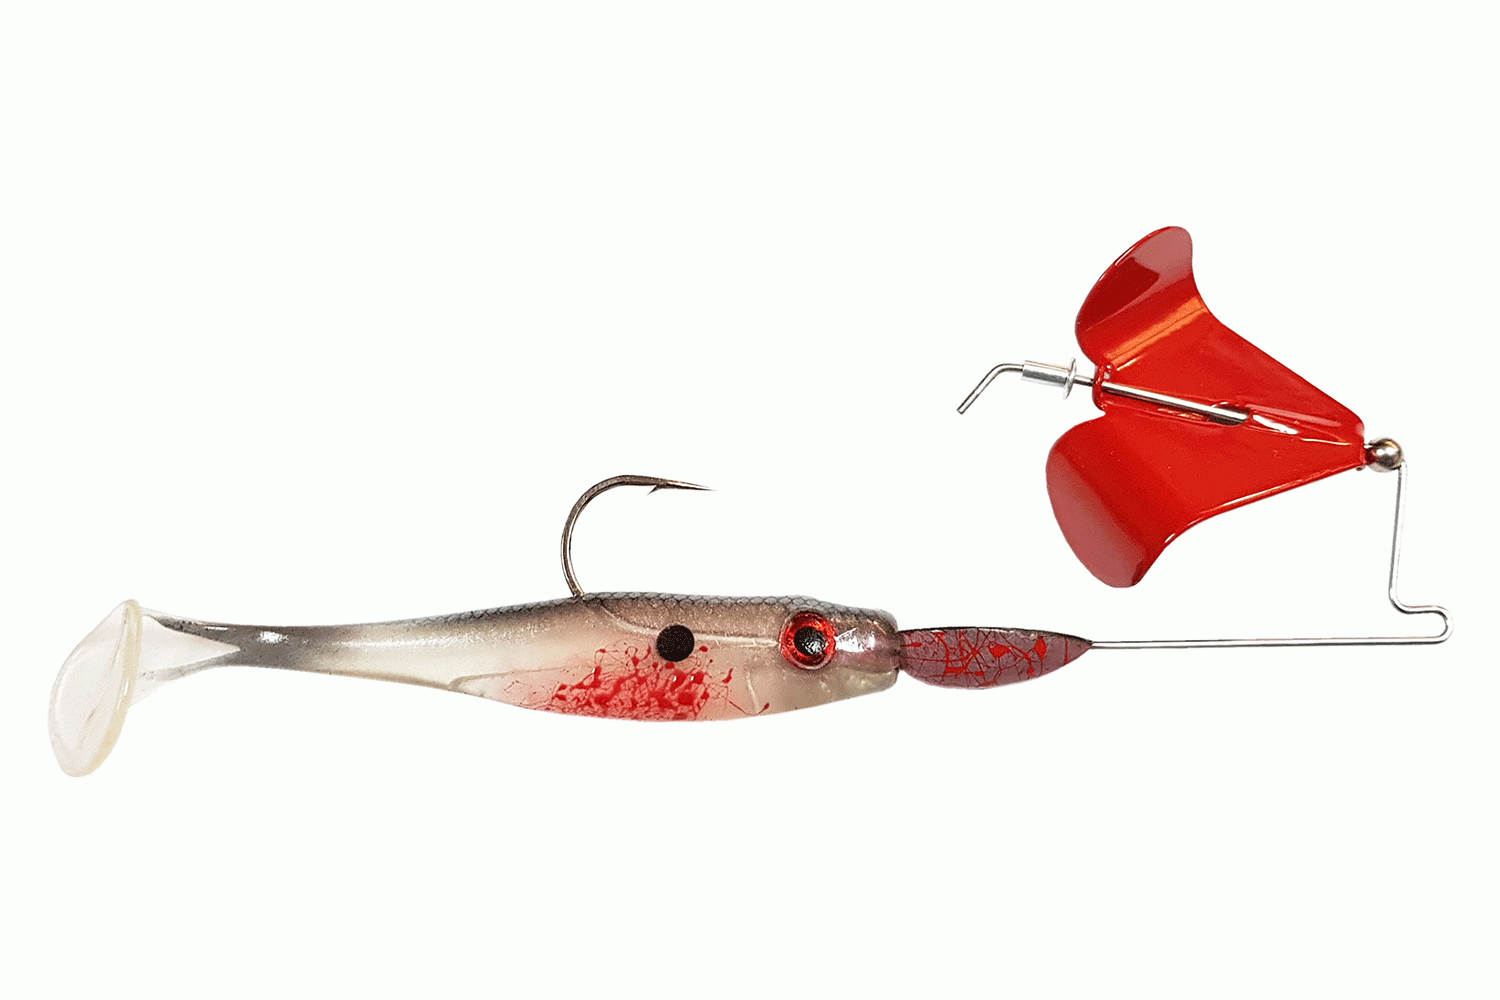 Thumpin' Blades: put some Spin in your Fishing - MidWest Outdoors